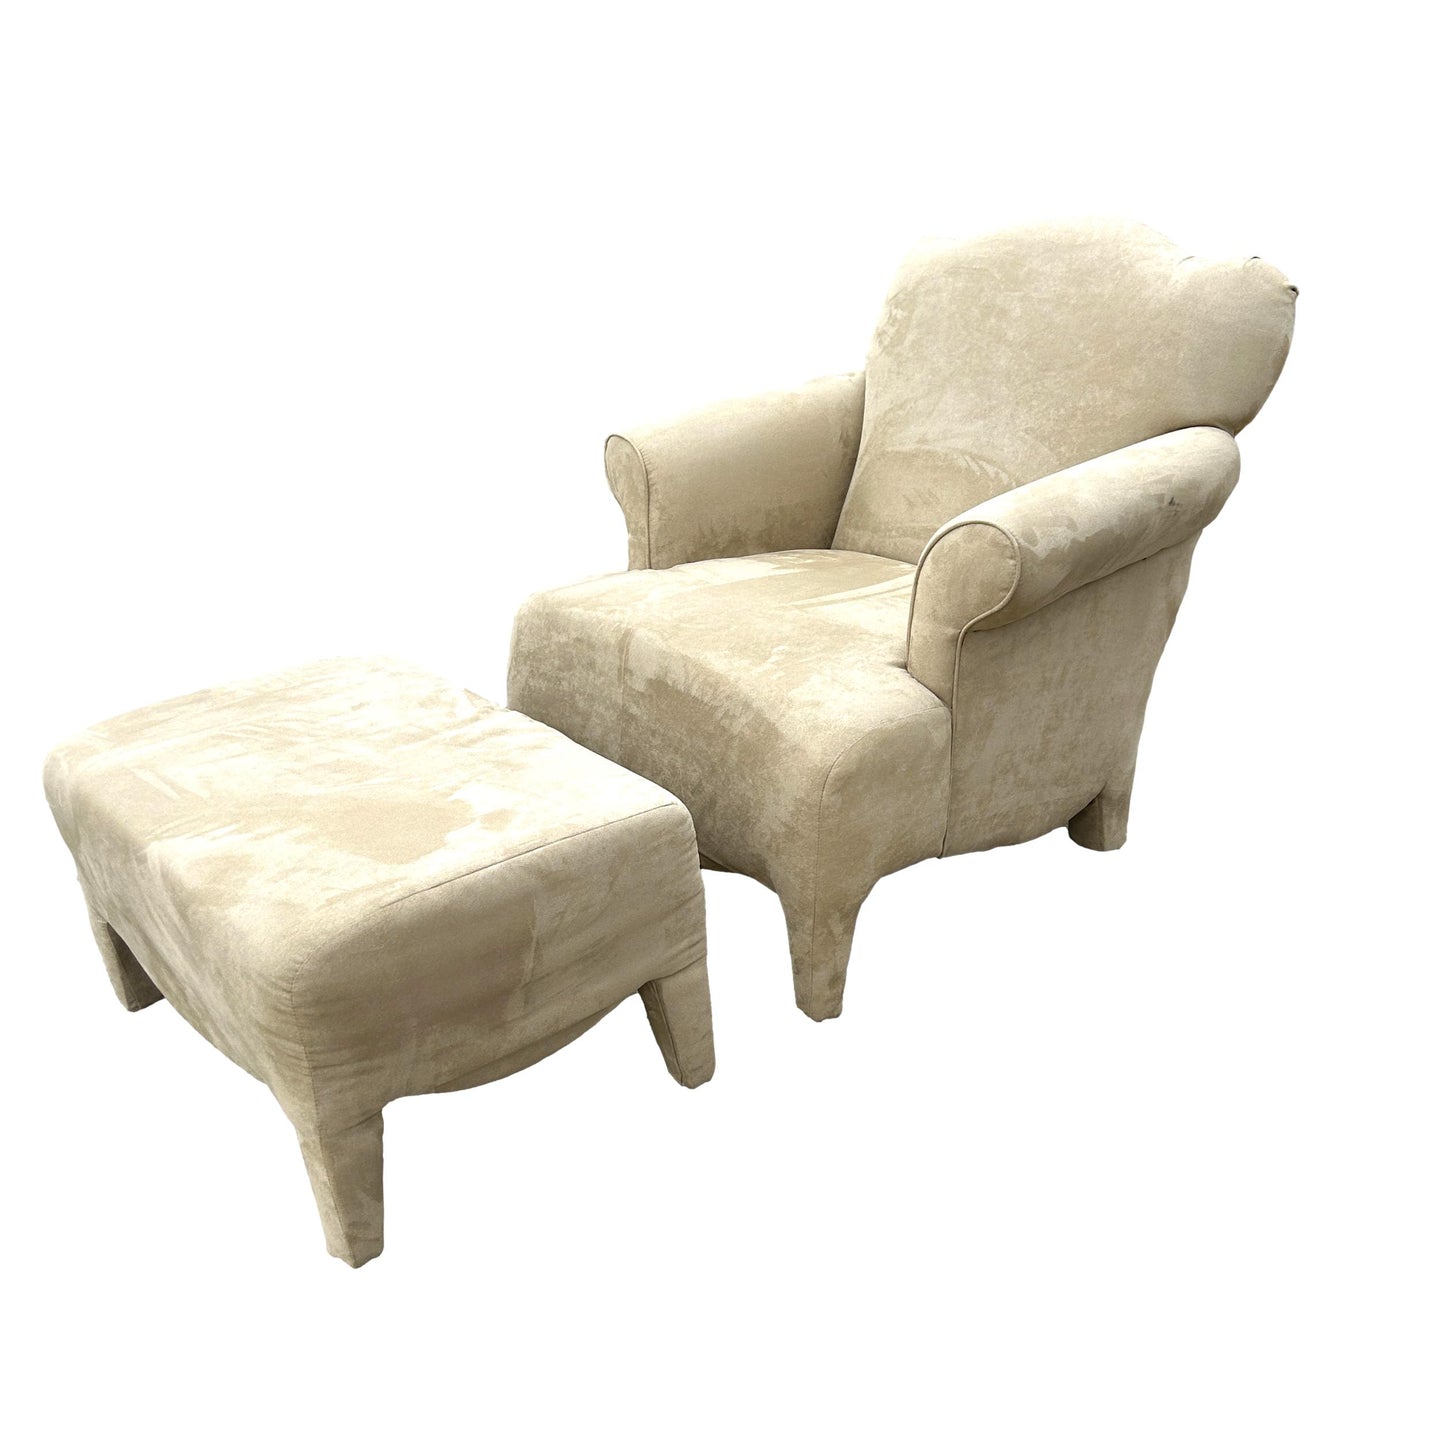 Beige Microfiber Chair and Ottoman